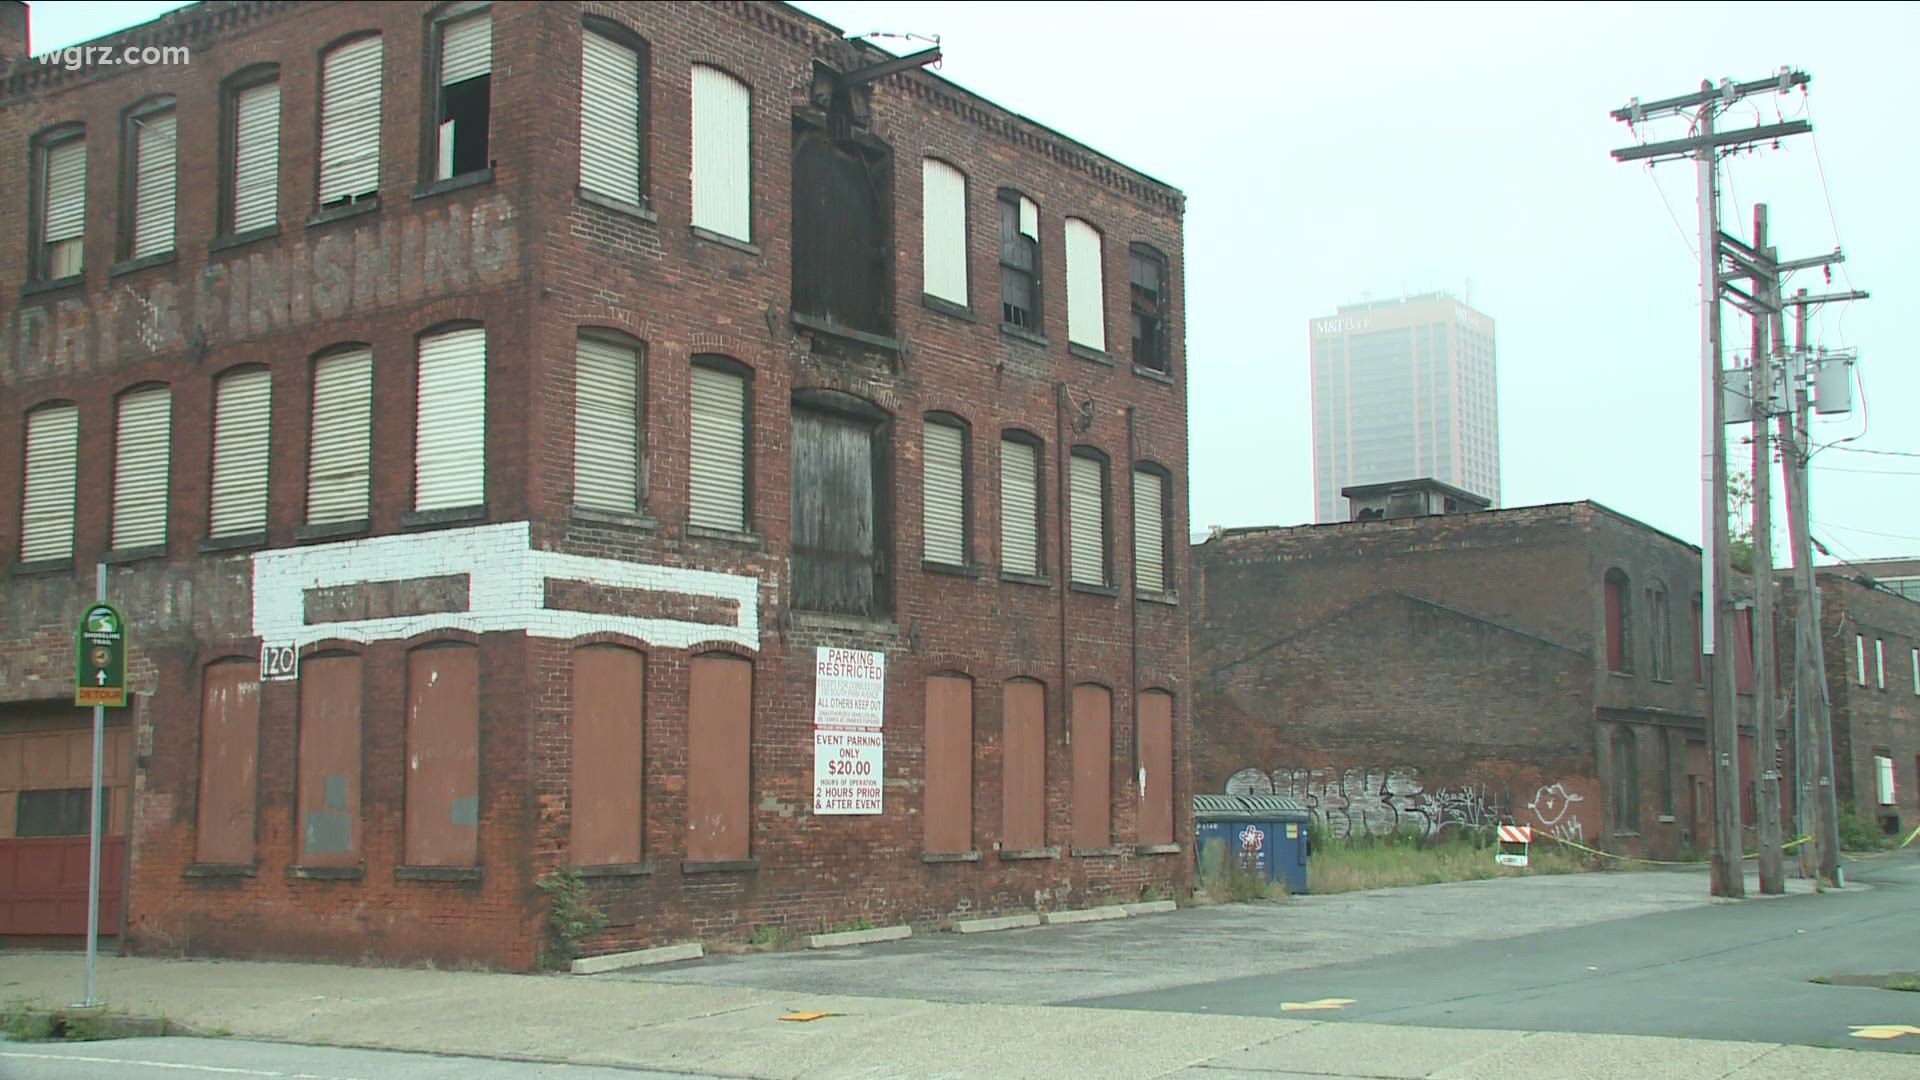 Plan to prevent demolitions in Buffalo